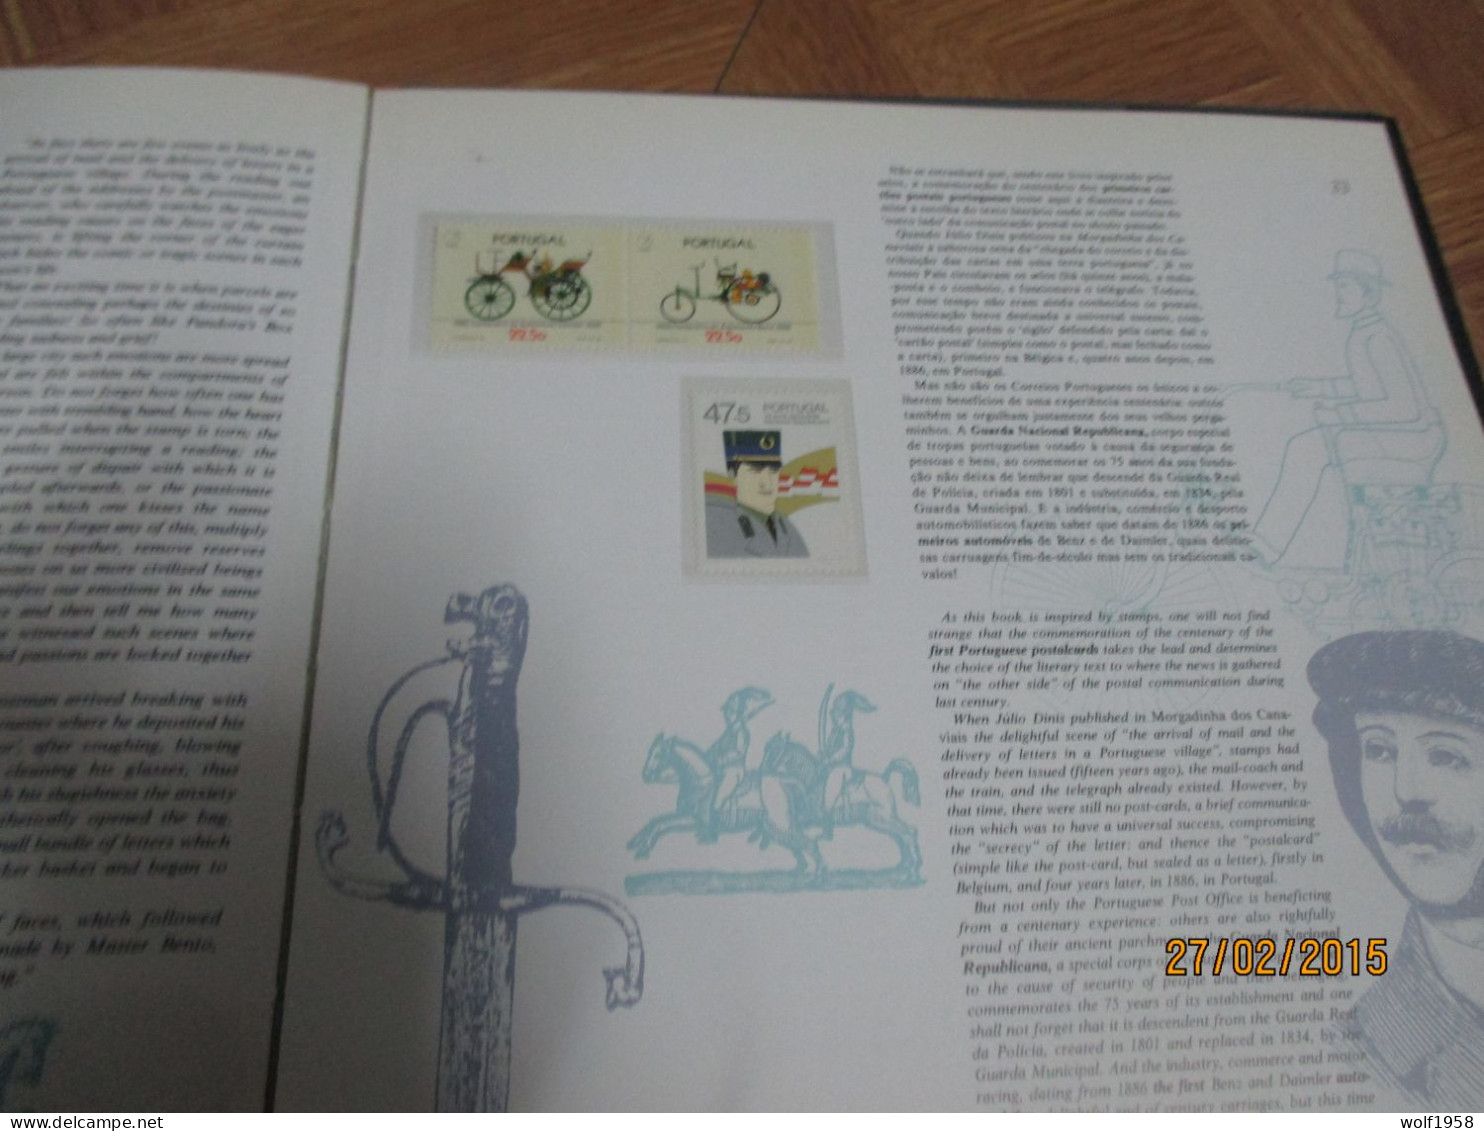 PORTUGAL IN STAMPS EM SELOS 1986 - YEAR BOOK - JAHRBUCH - Libro Dell'anno